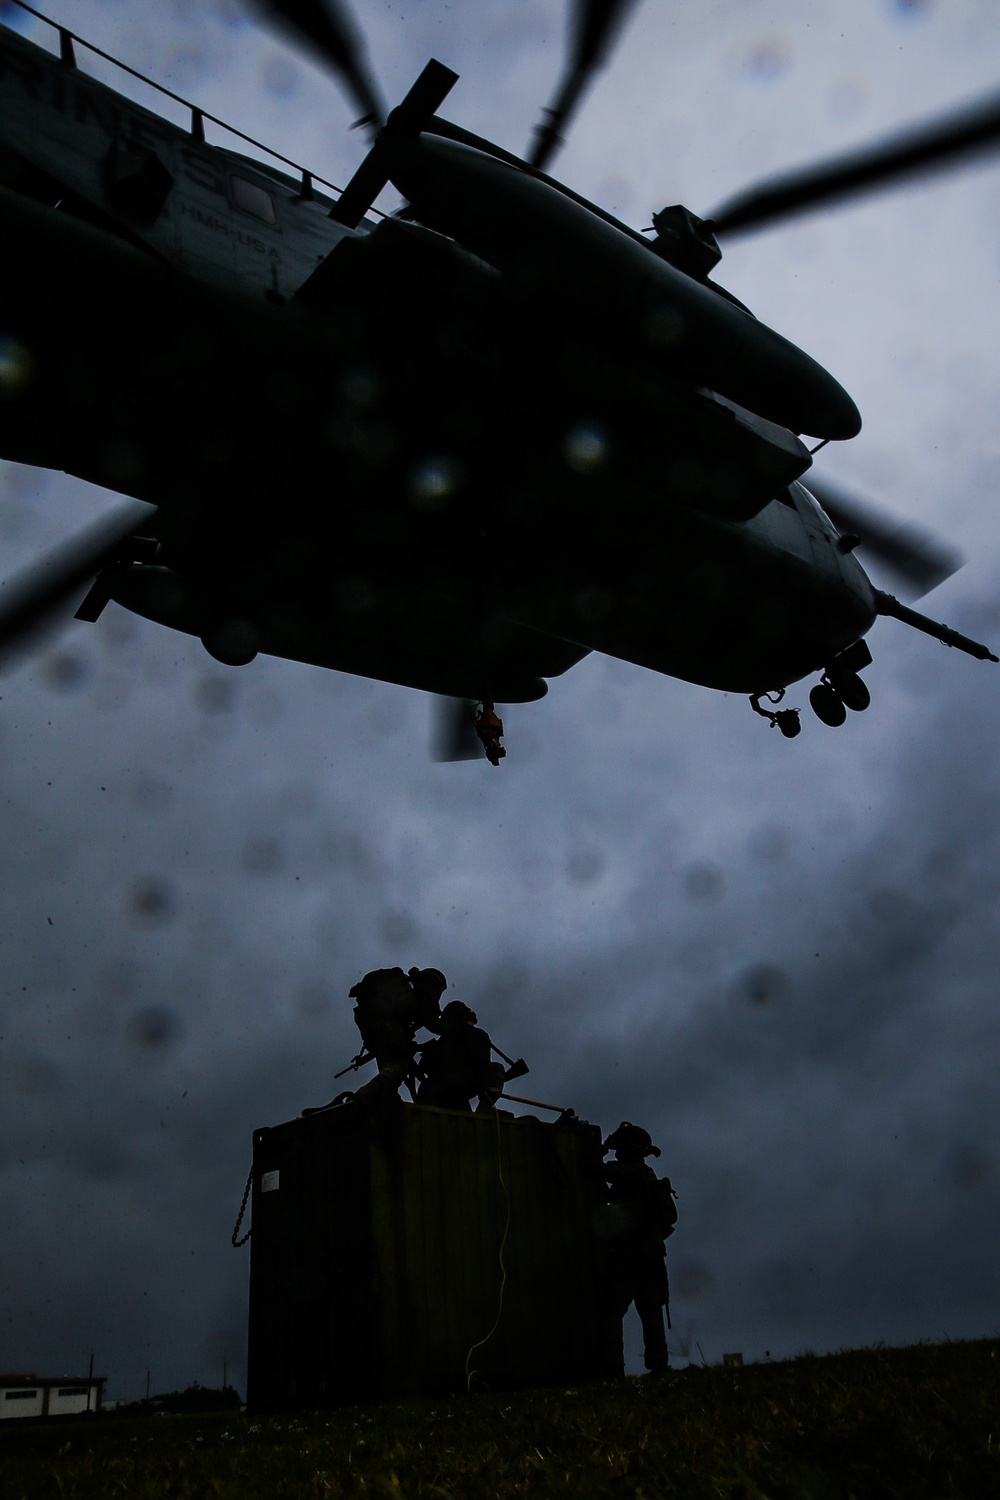 It takes a Village | Marines with LSB participate in Exercise Pacific Pioneer